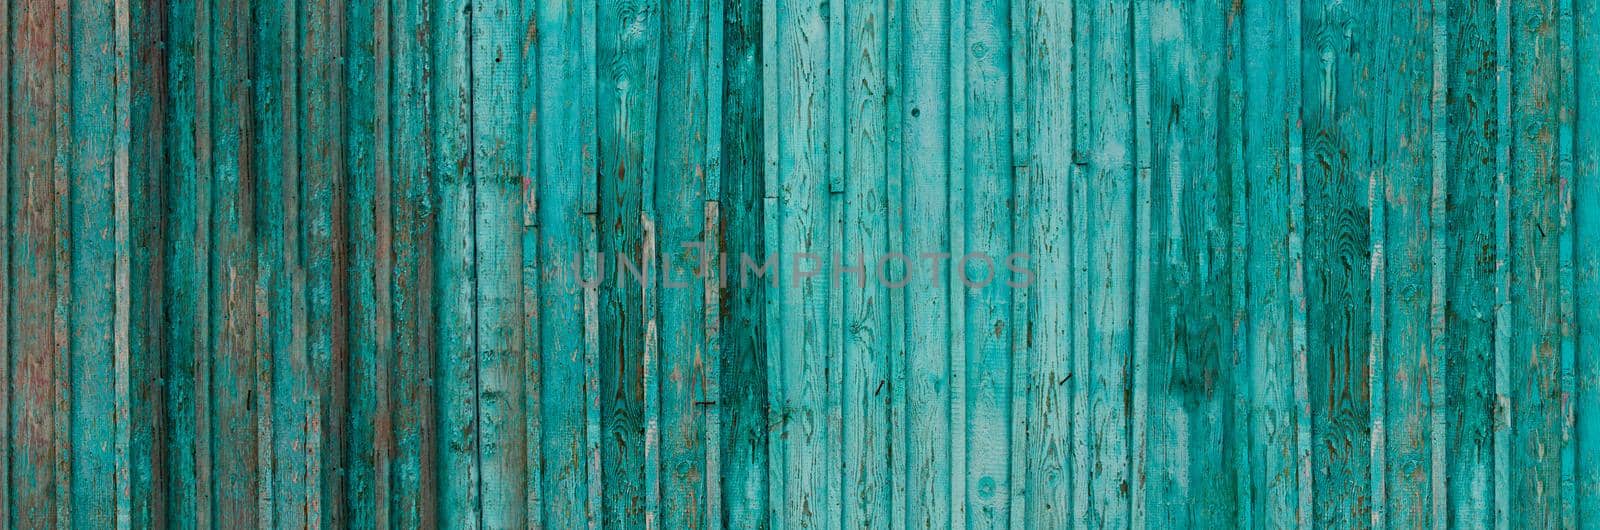 Gray wood texture banner with traces of cracked aquamarine paint.Abstract background,blank template. rustic weathered wood barn background with scratches,nails and knots.Copy space.